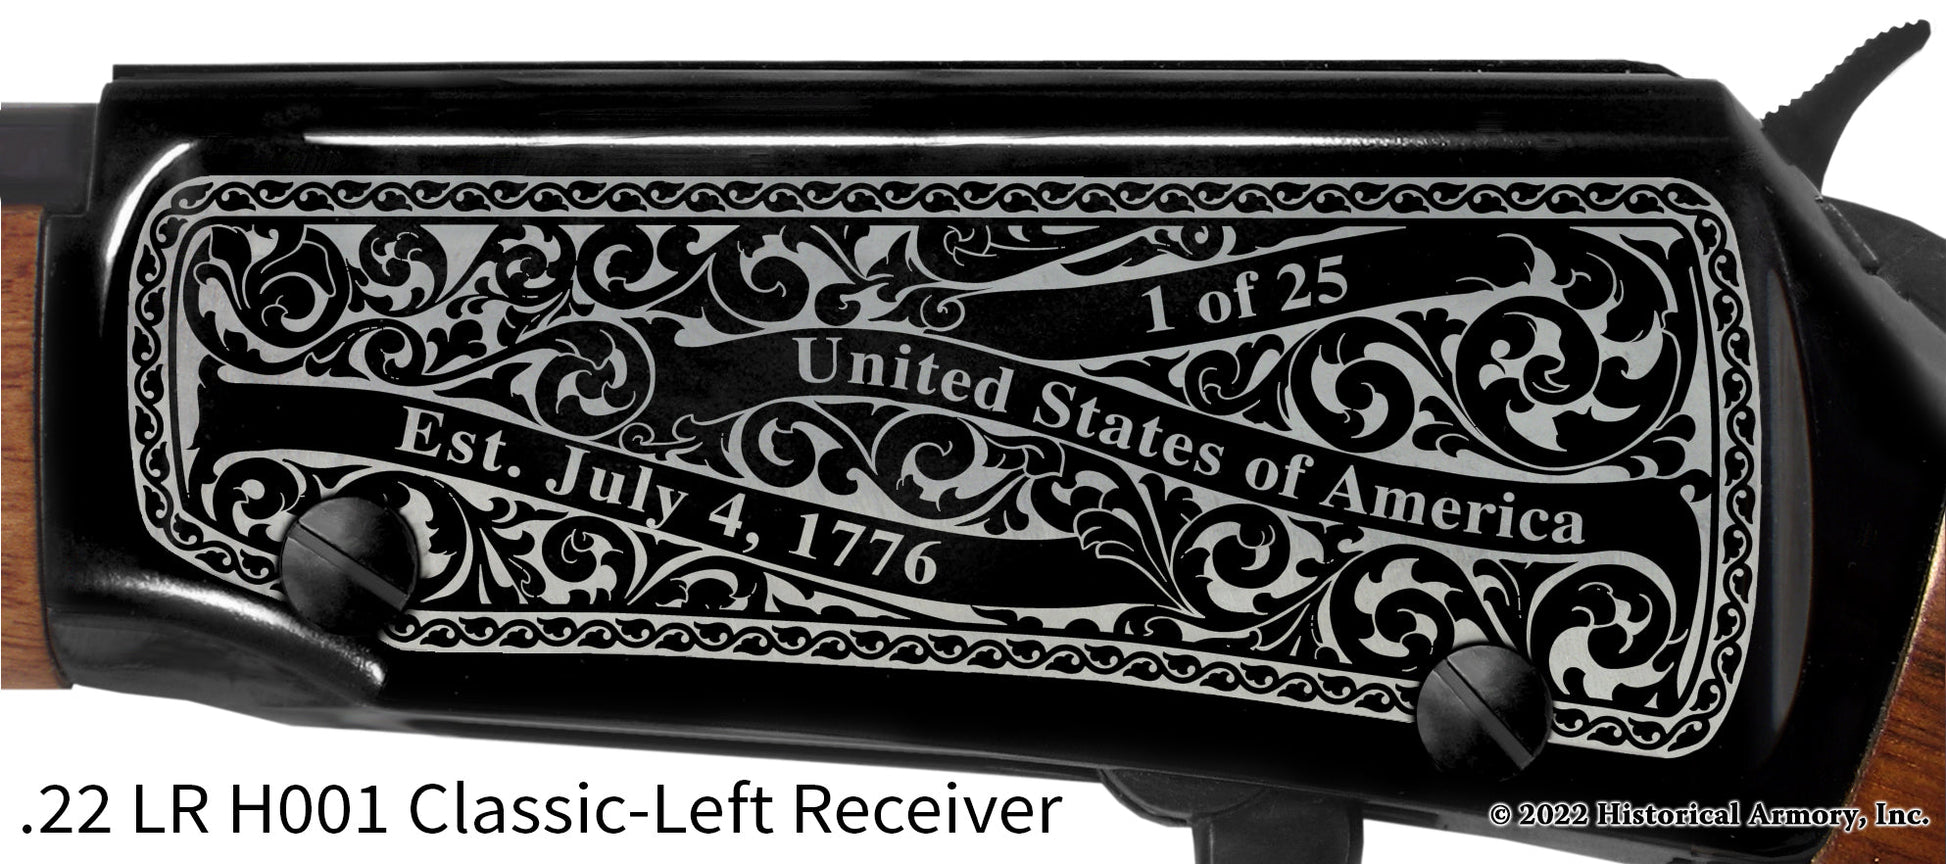 Fairfield County Ohio Engraved Henry H001 Rifle